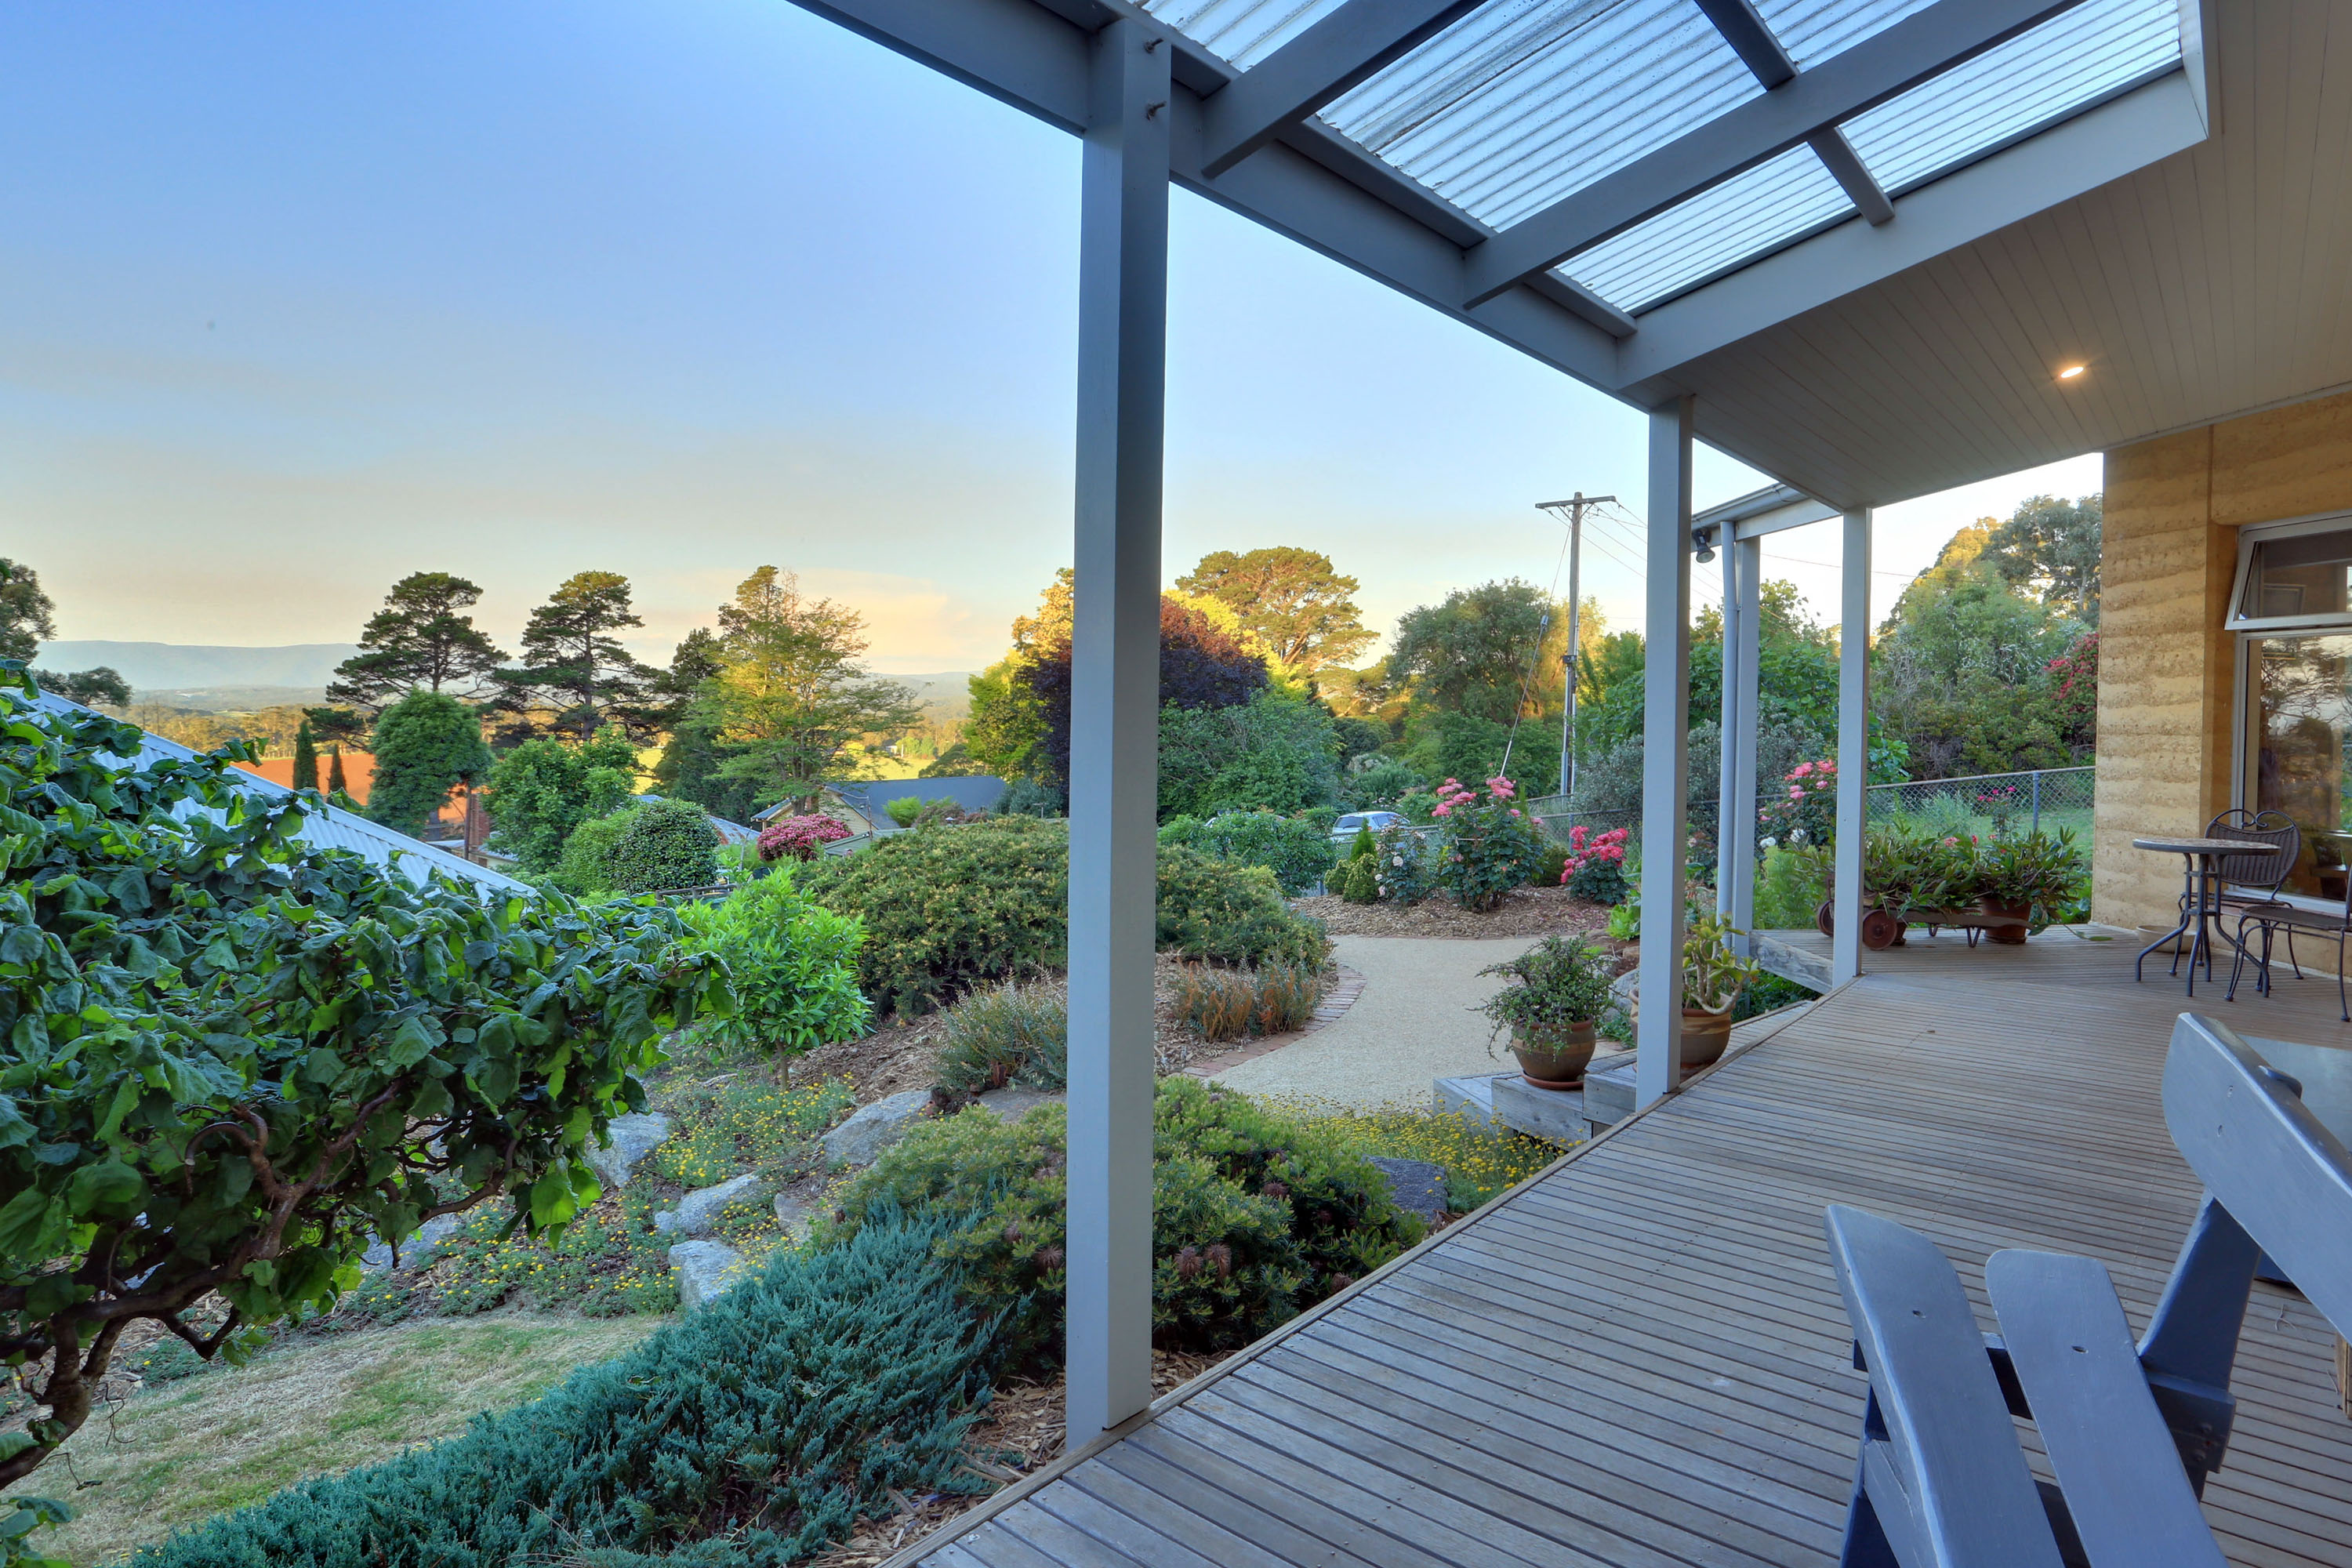 CREATE YOU OWN WEALTH IN THE JEWEL OF THE DANDENONG RANGES image 5